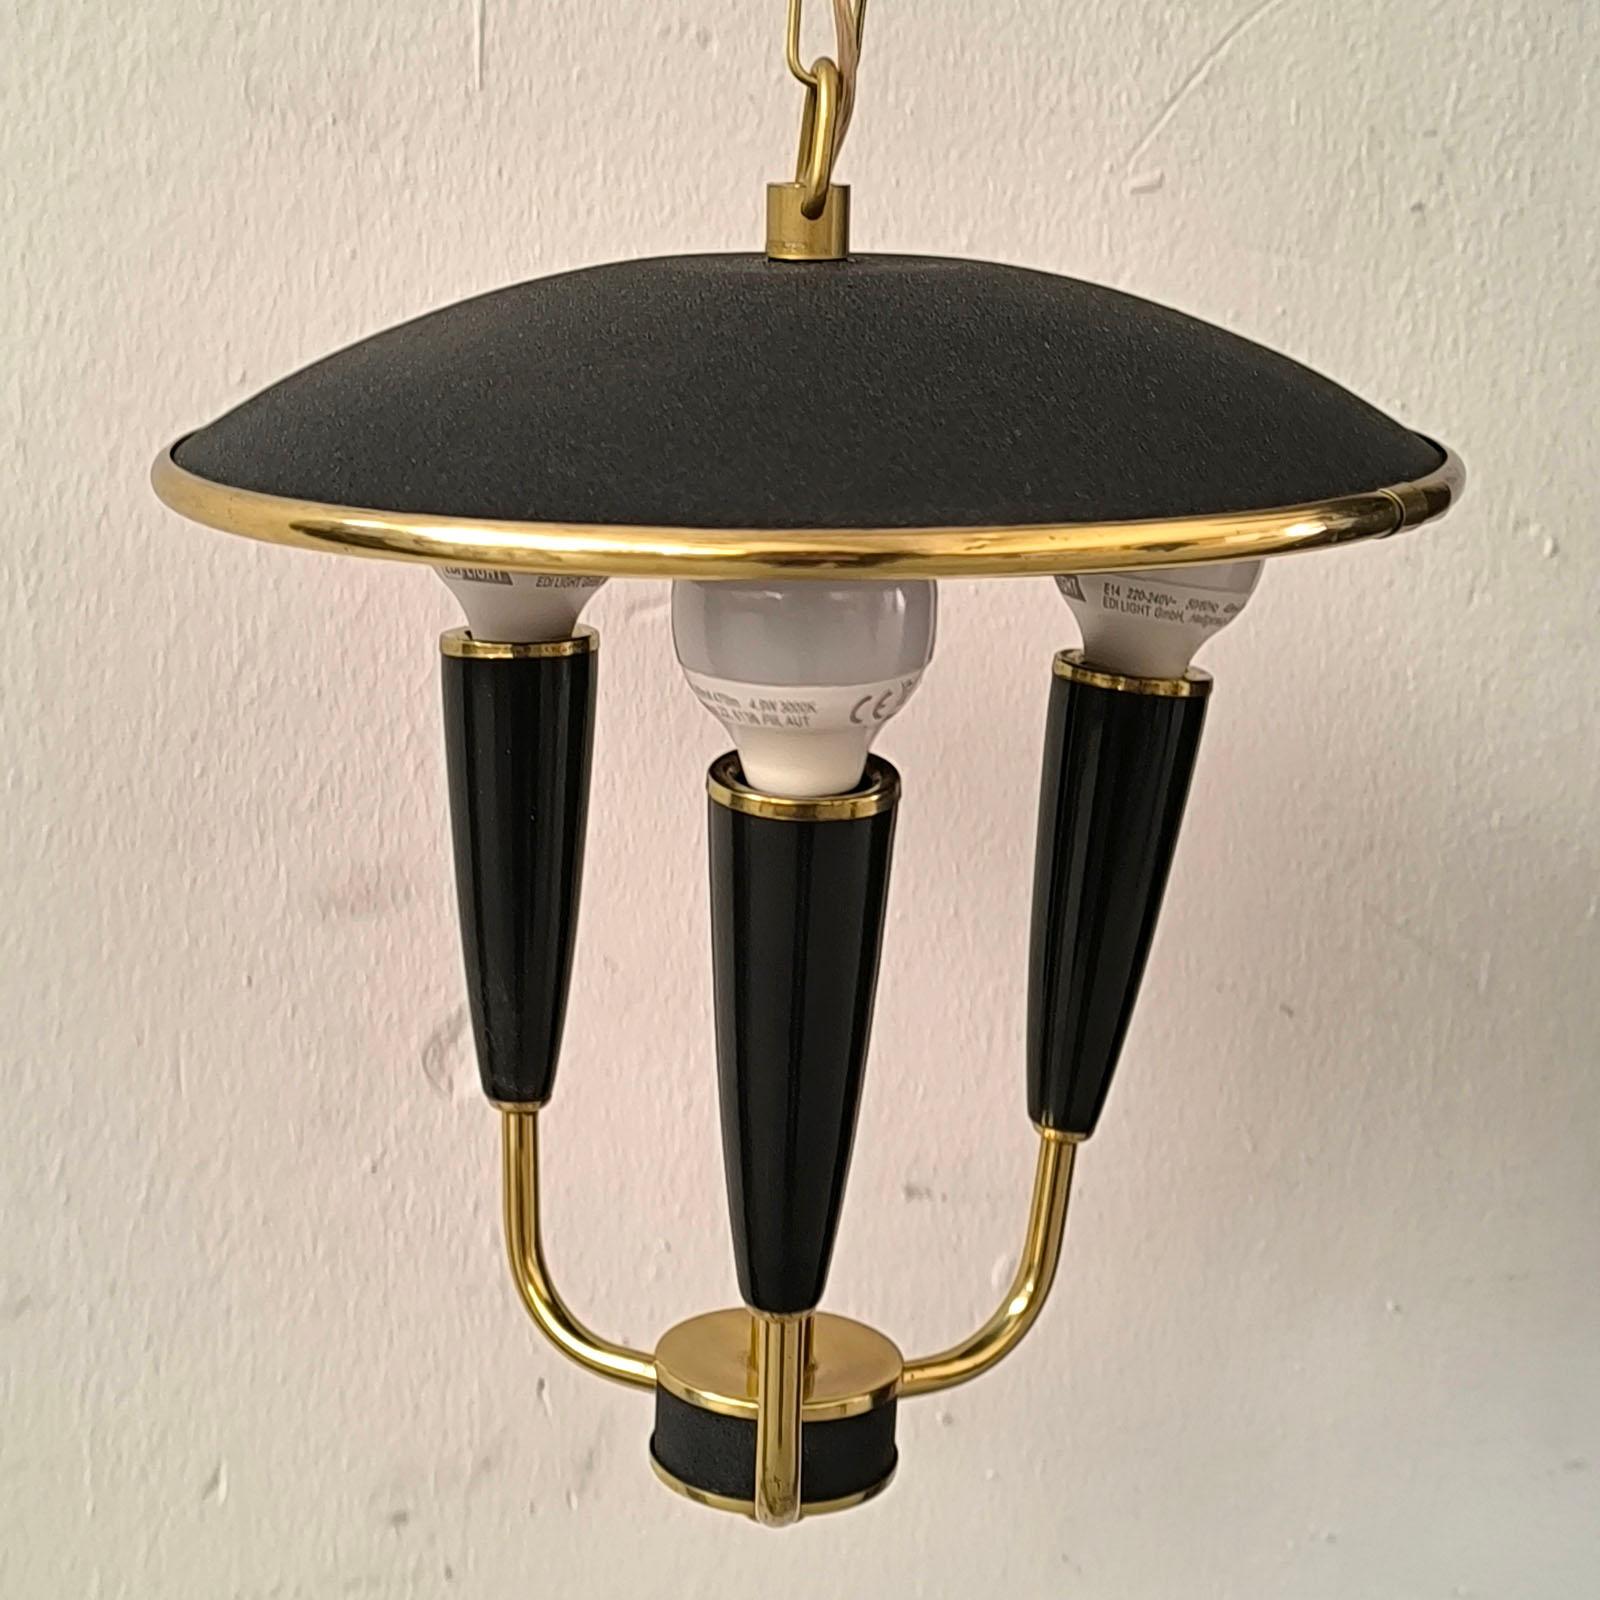 Mid-20th Century French Mid-Century Modern Ceiling Light Attributed to Maison Lunel, 1940s For Sale